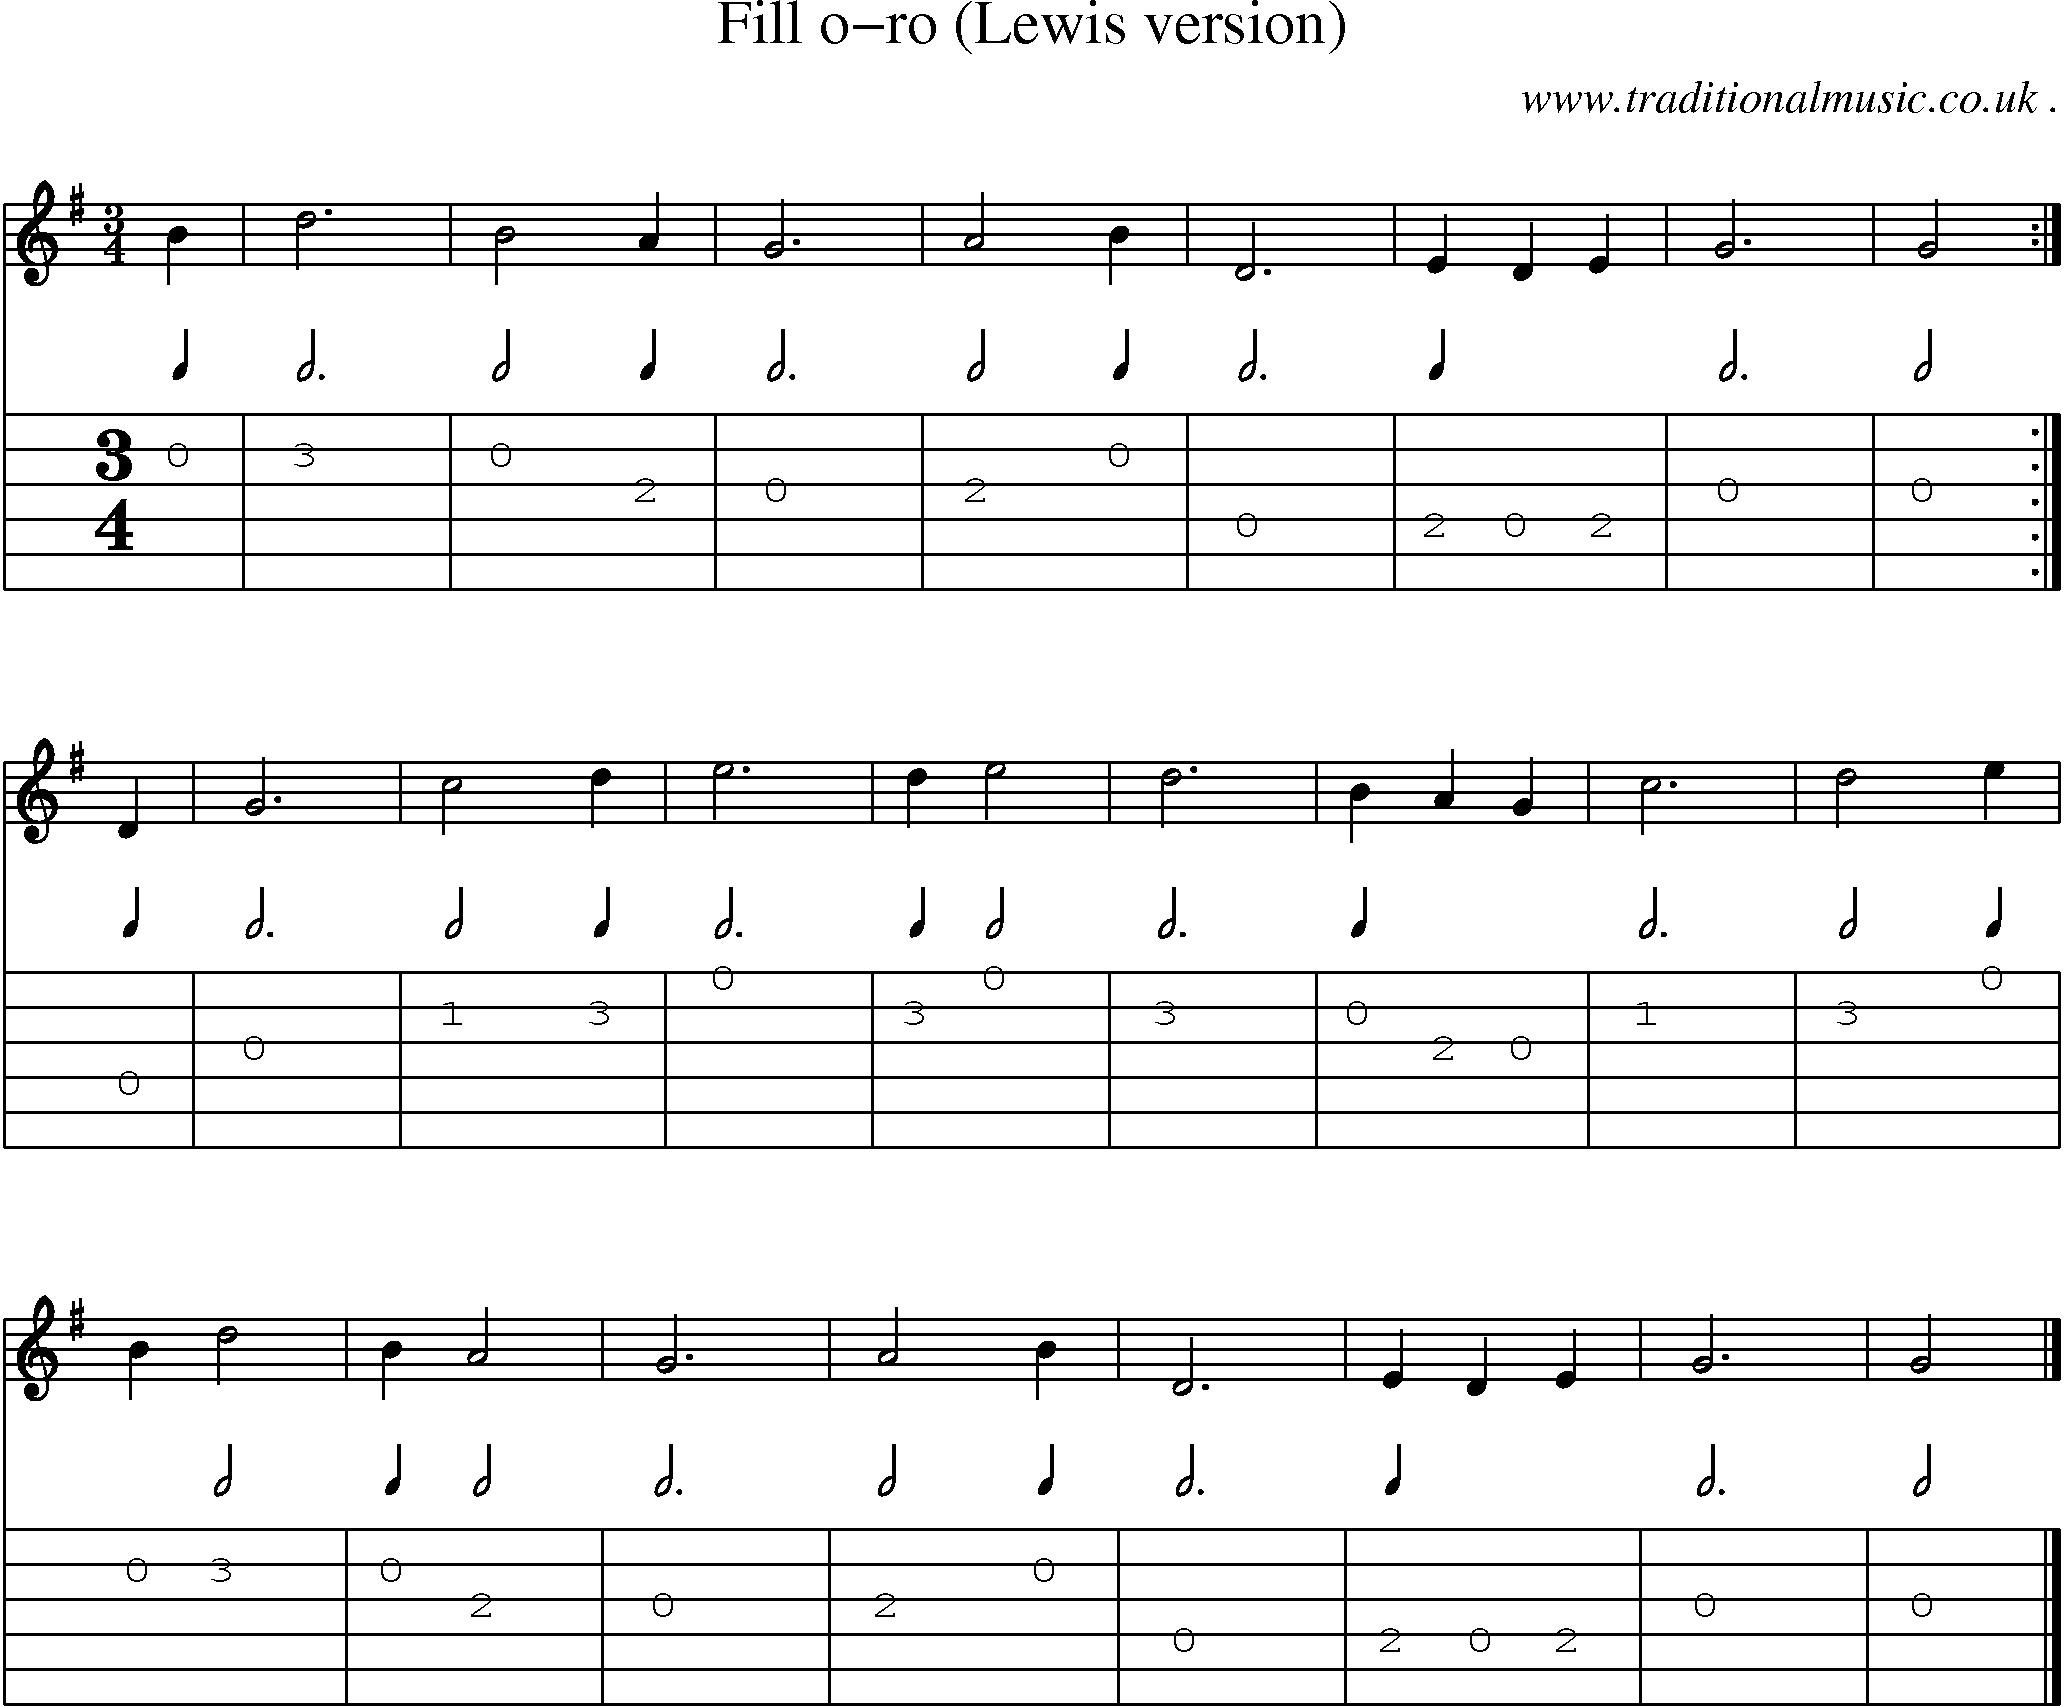 Sheet-music  score, Chords and Guitar Tabs for Fill O-ro Lewis Version